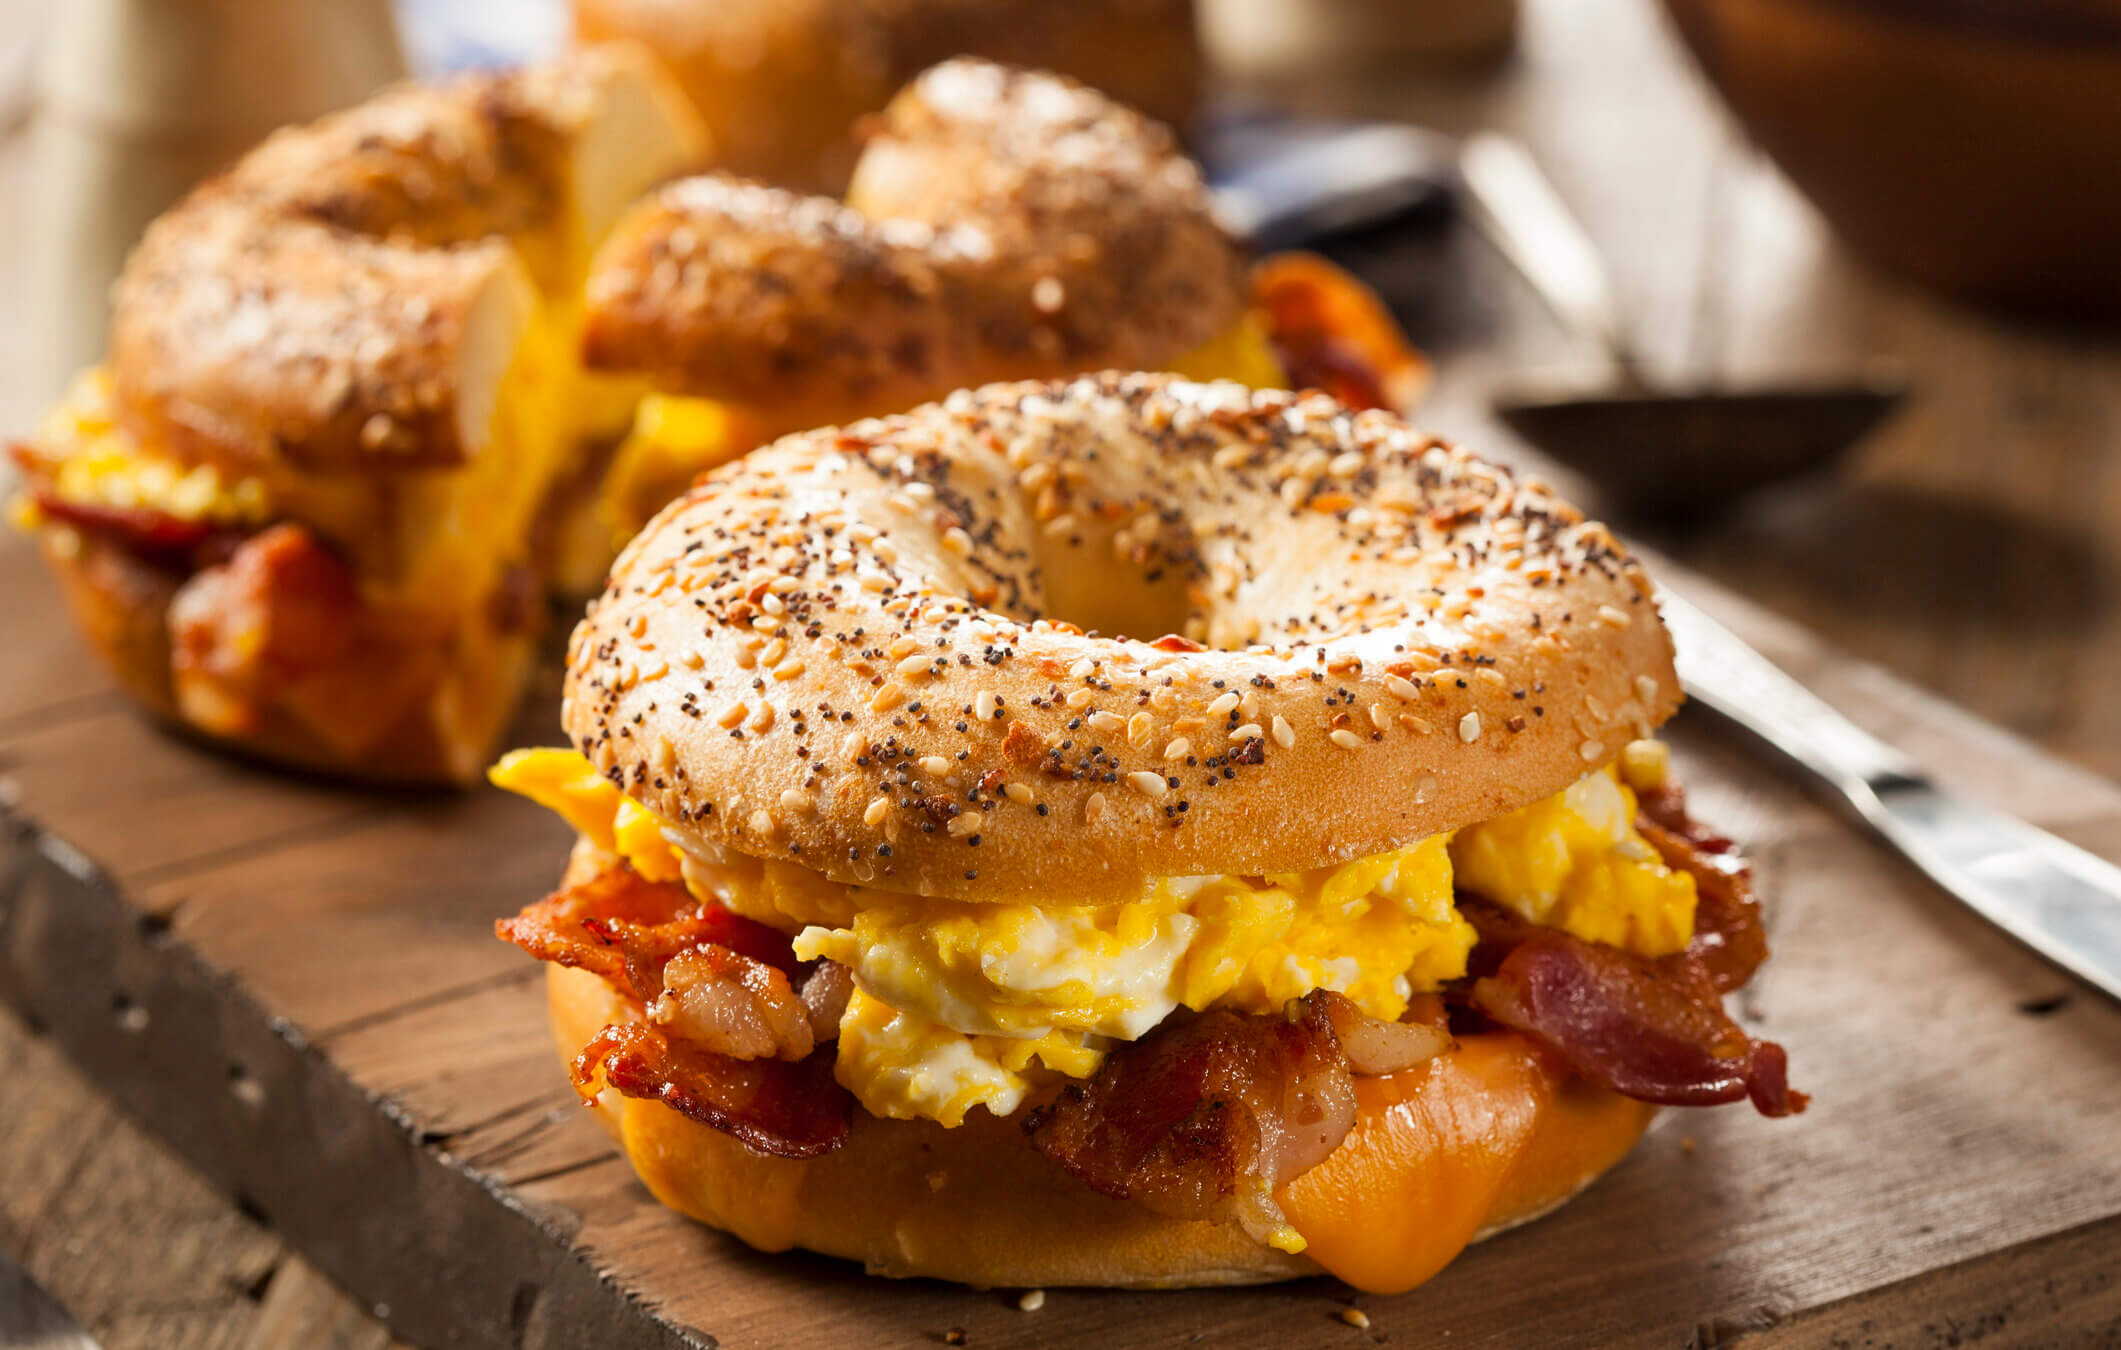 So as not to be biased, this is neither a Mendel’s nor a Schragel’s bagel, but is a stock image.